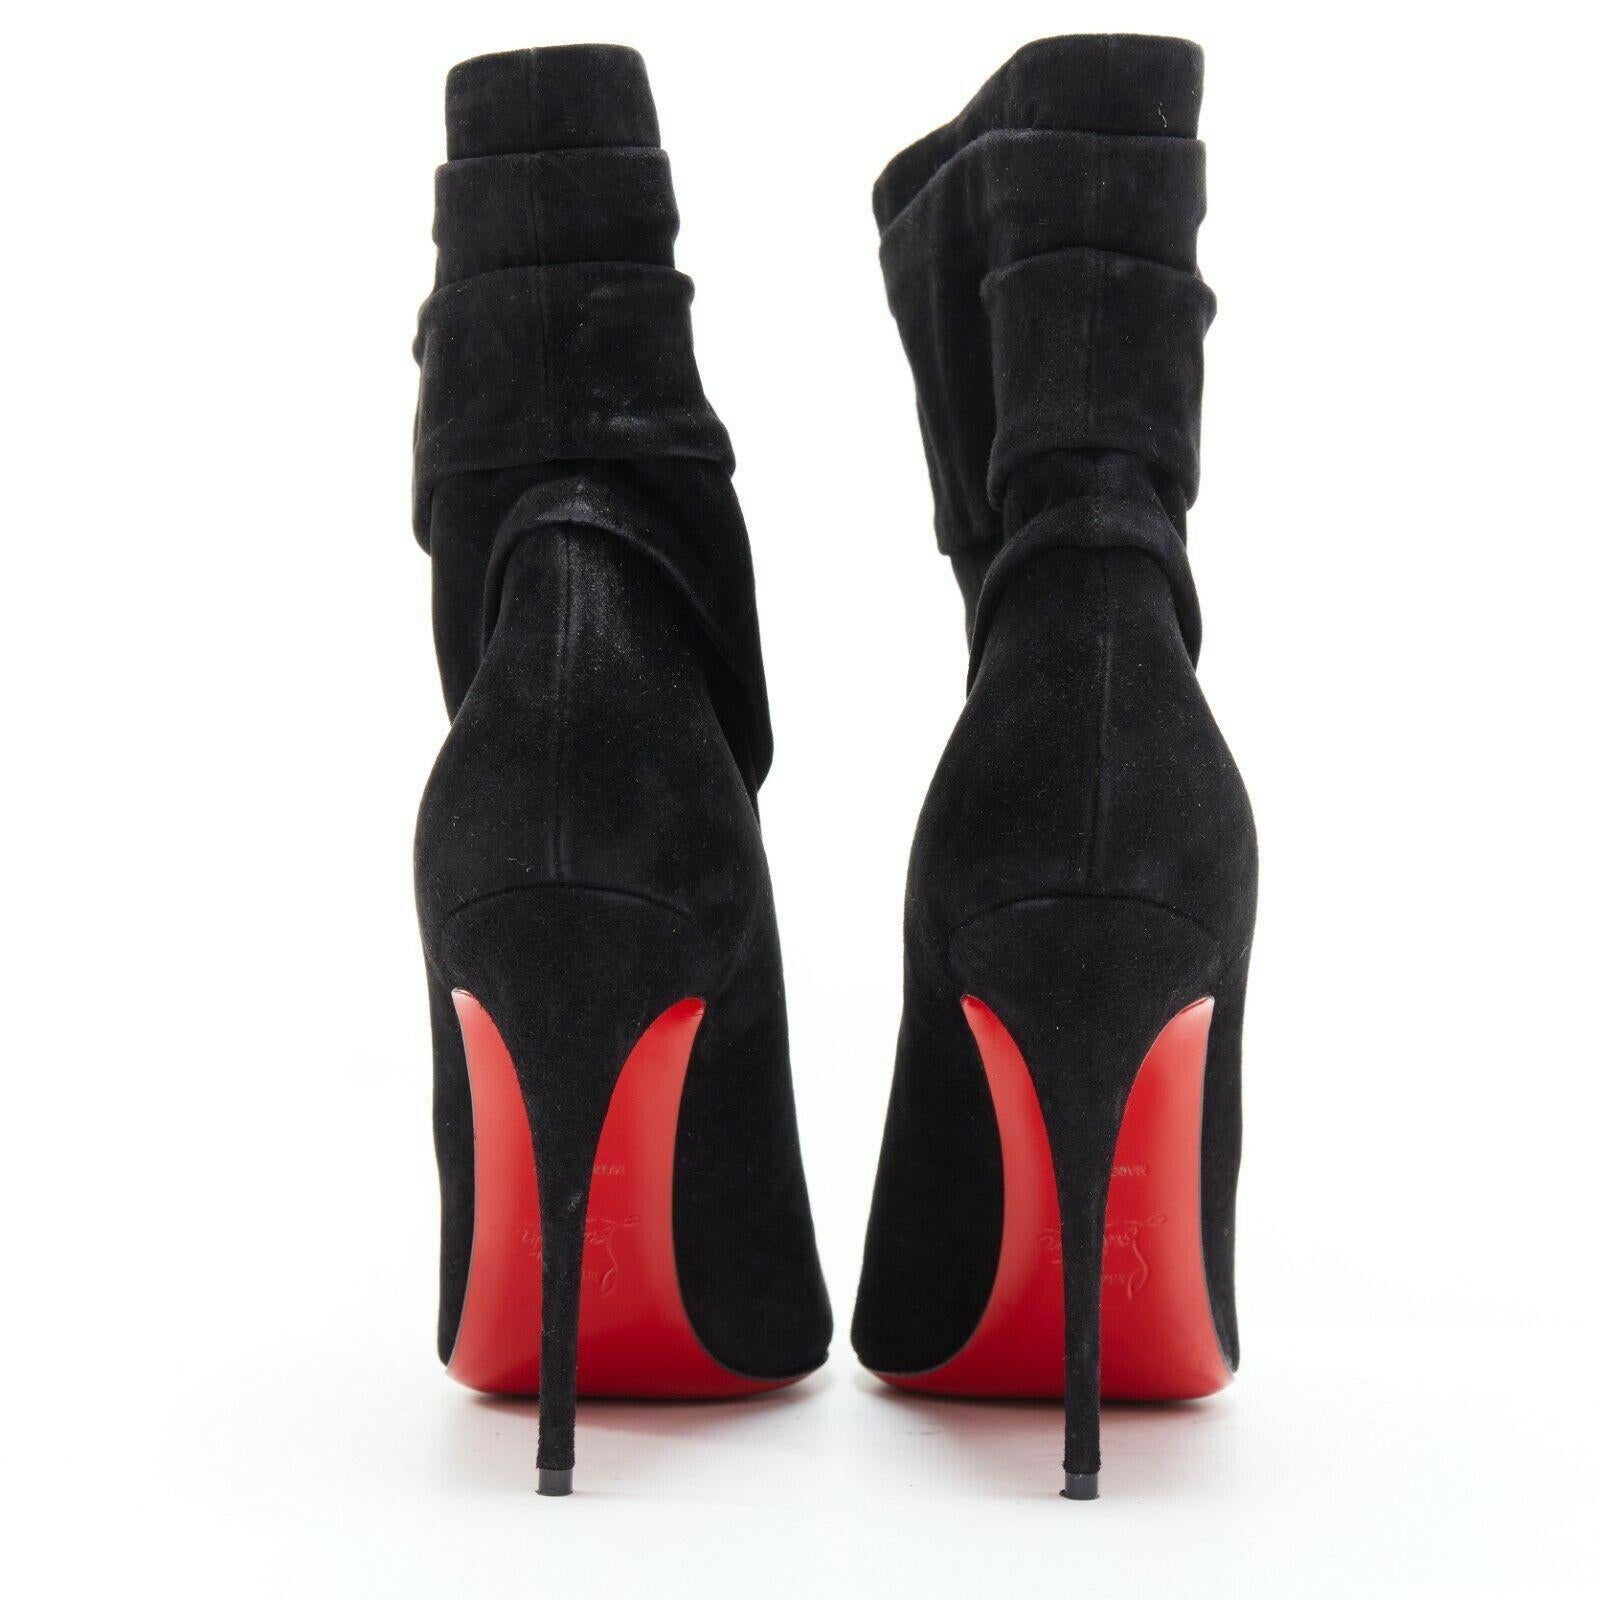 Women's CHRISTIAN LOUBOUTIN Ishtar 100 black suede pointed toe ruched heel boot EU39